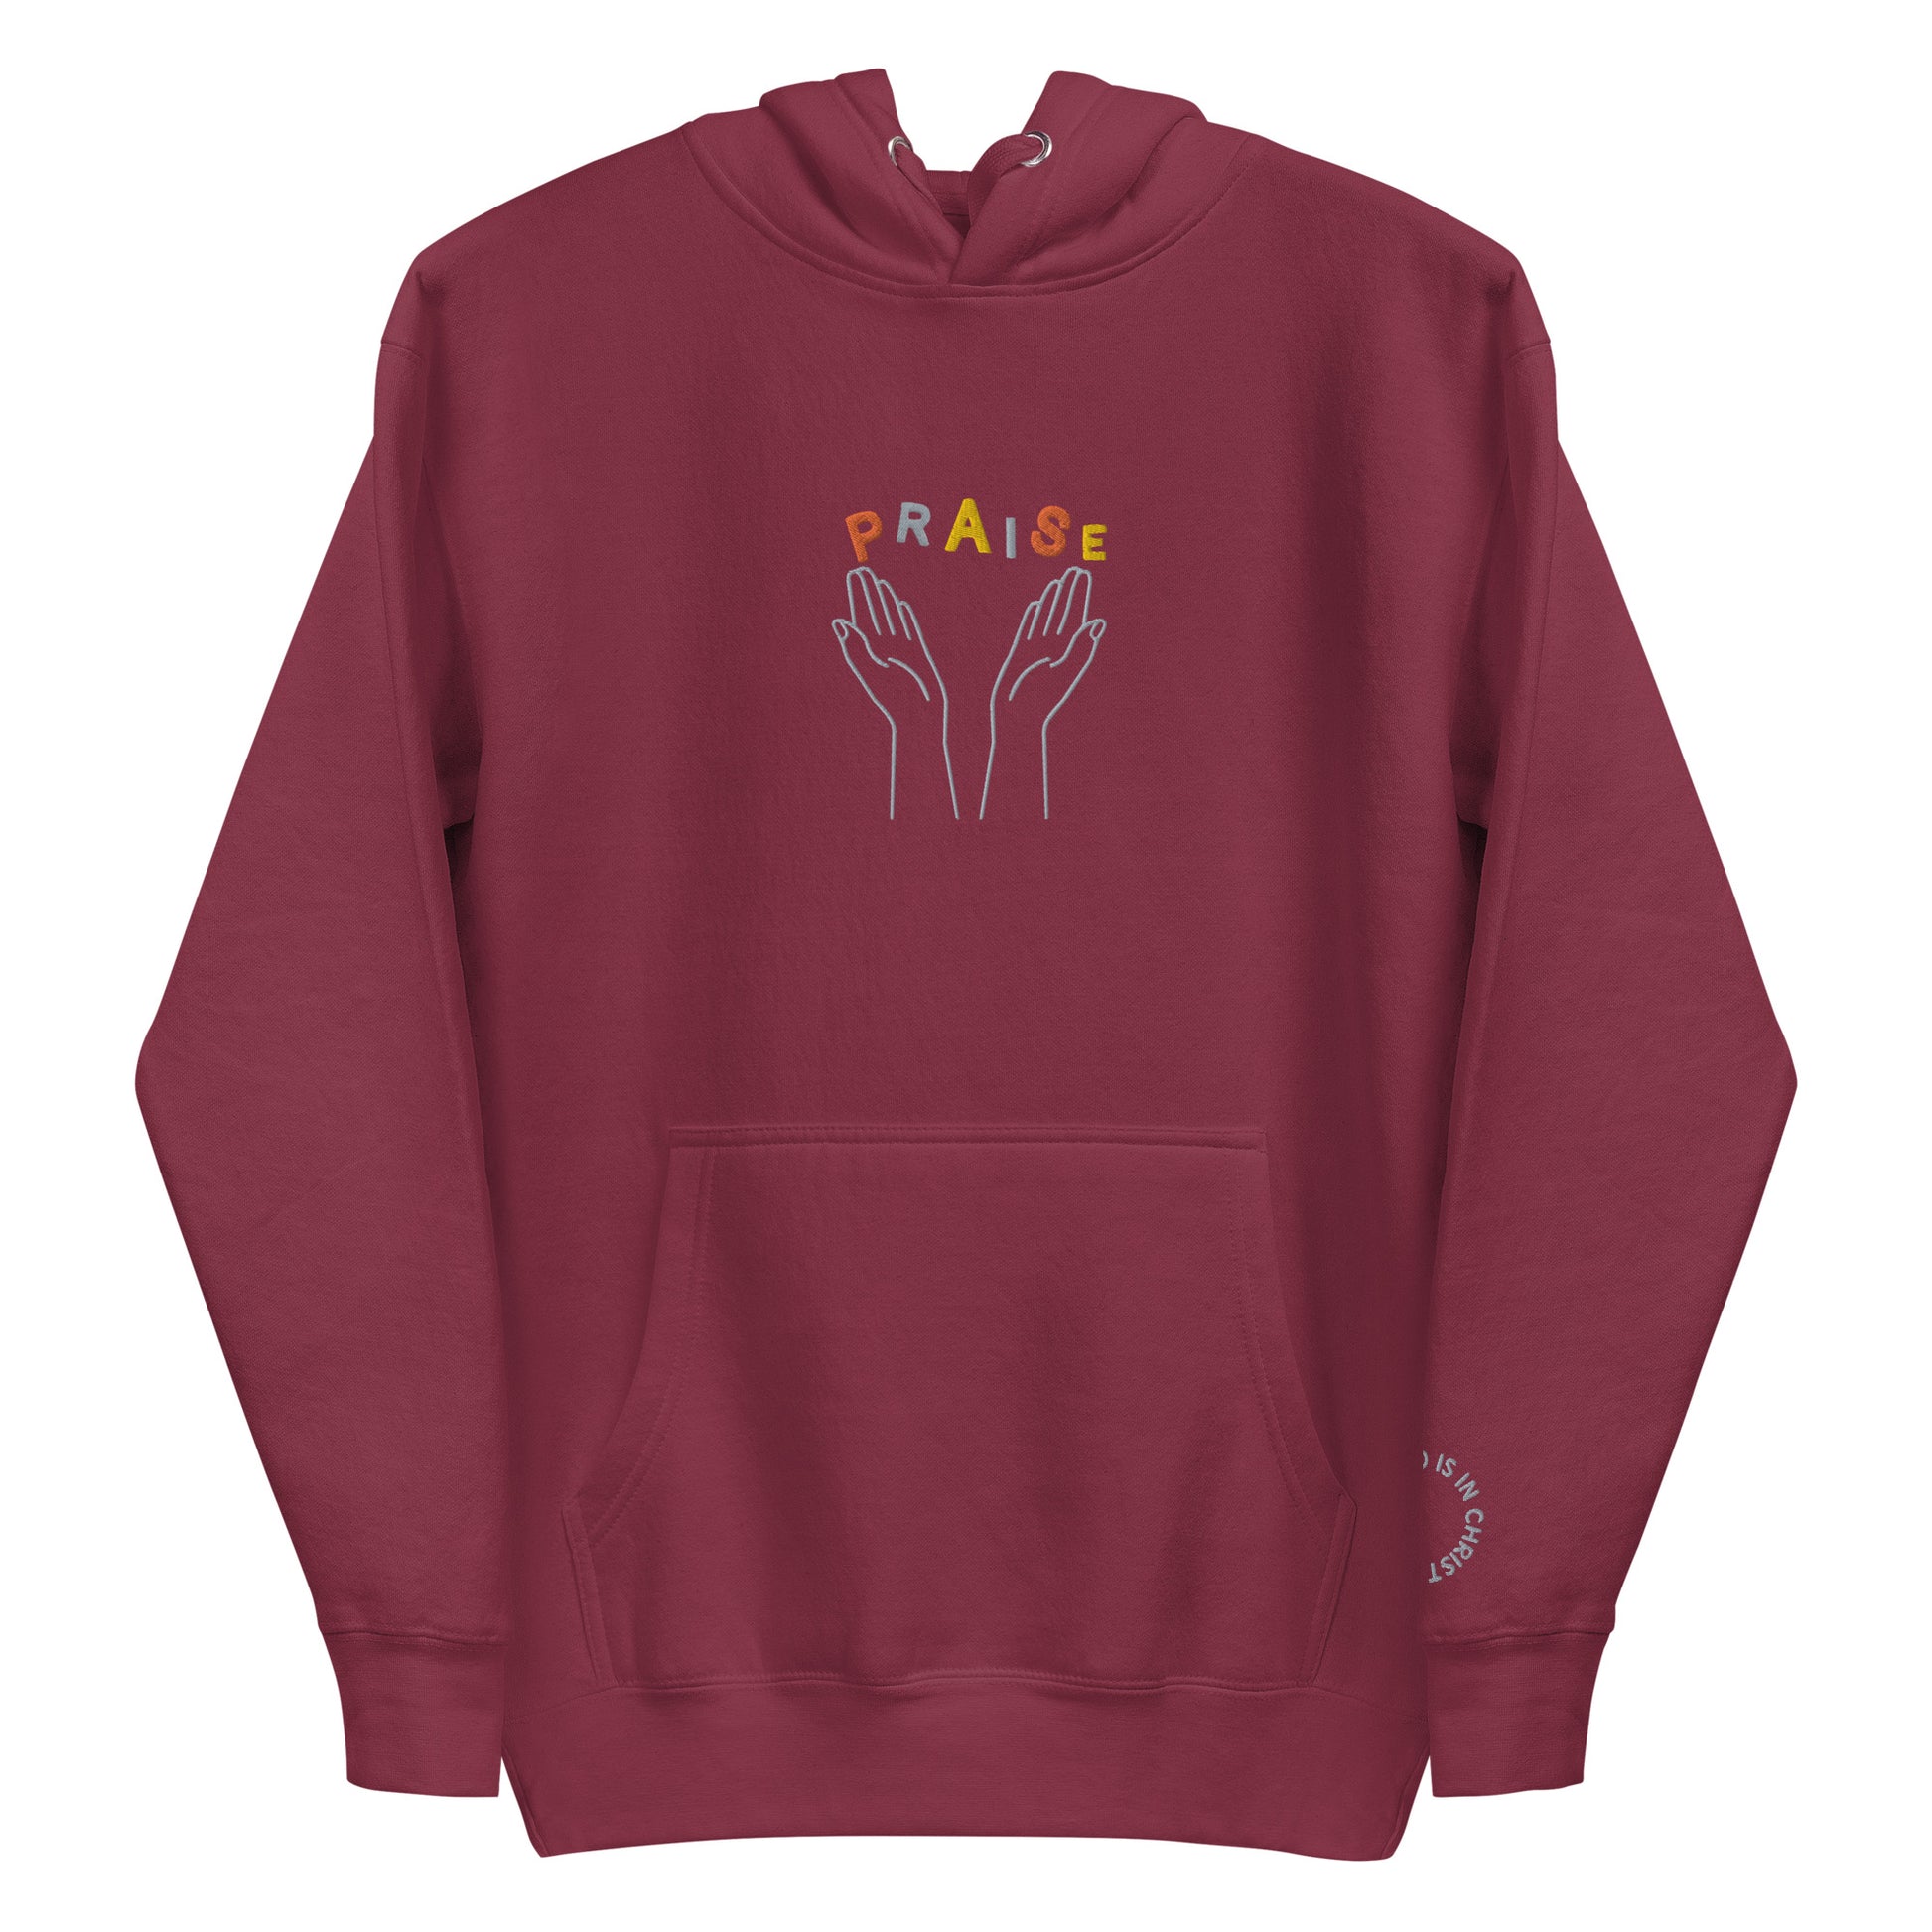 Praise Hands Embroidered Hoodie (centre) - S / BURGUNDY -